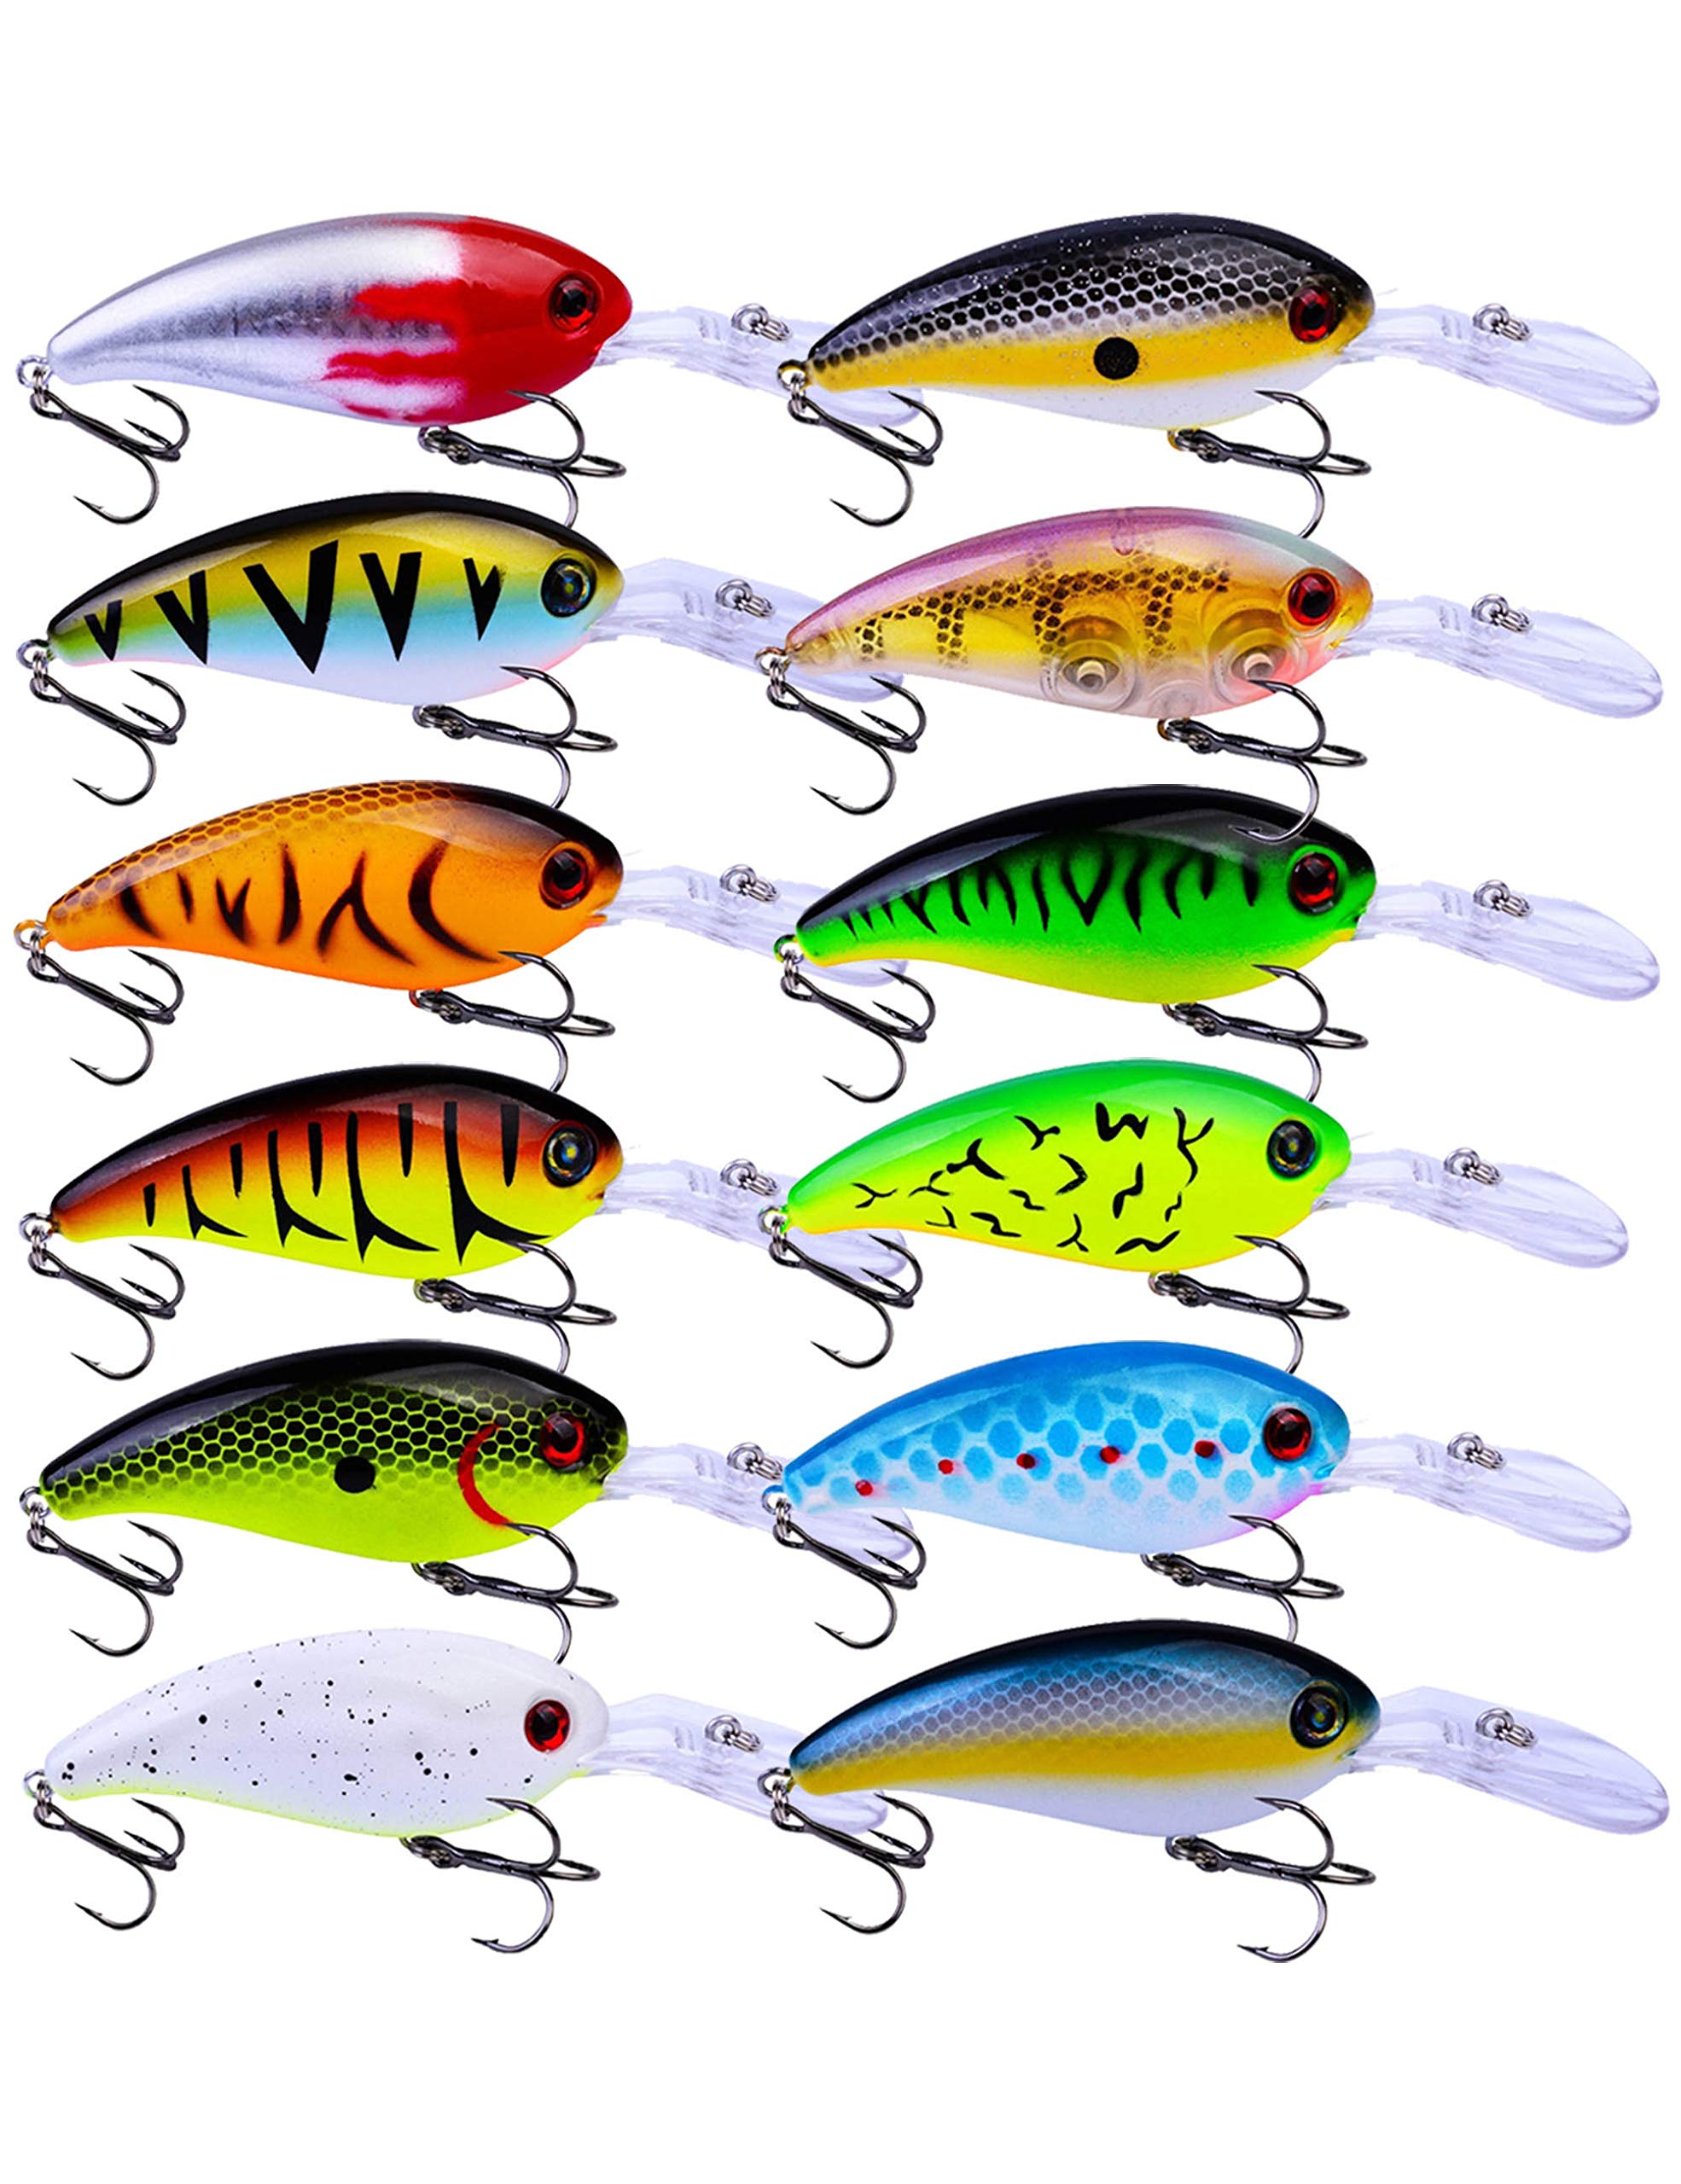 Black Friday Deals 2023! TopLLC Christmas Gifts 6 Segment Swimbait Lures  Crank baits Baits Hard Bait Fishing Lures Great for Kids and Outdoor Family